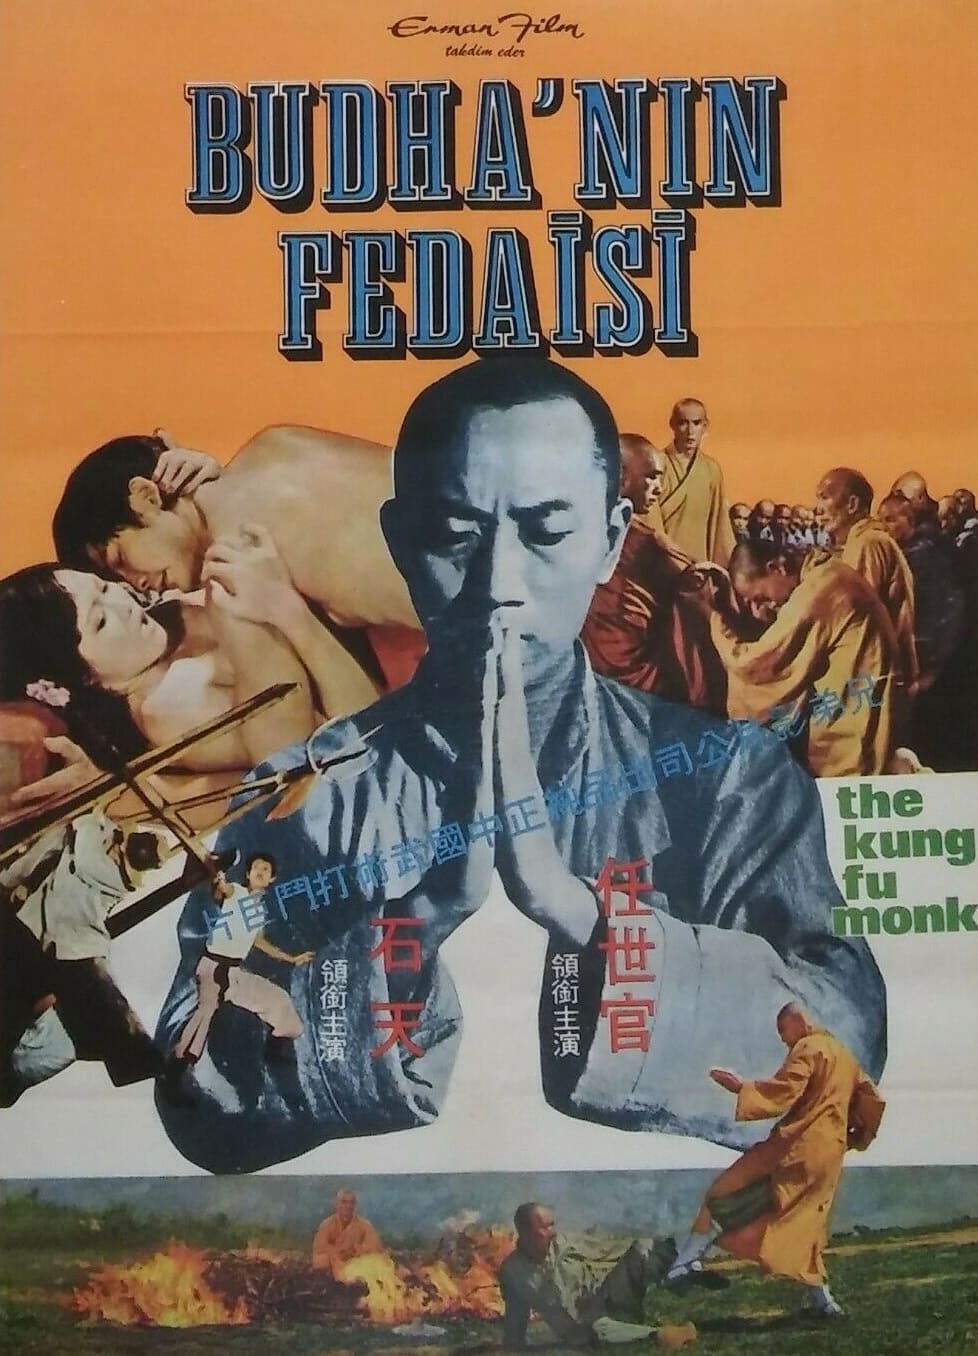 The Monk (1975)